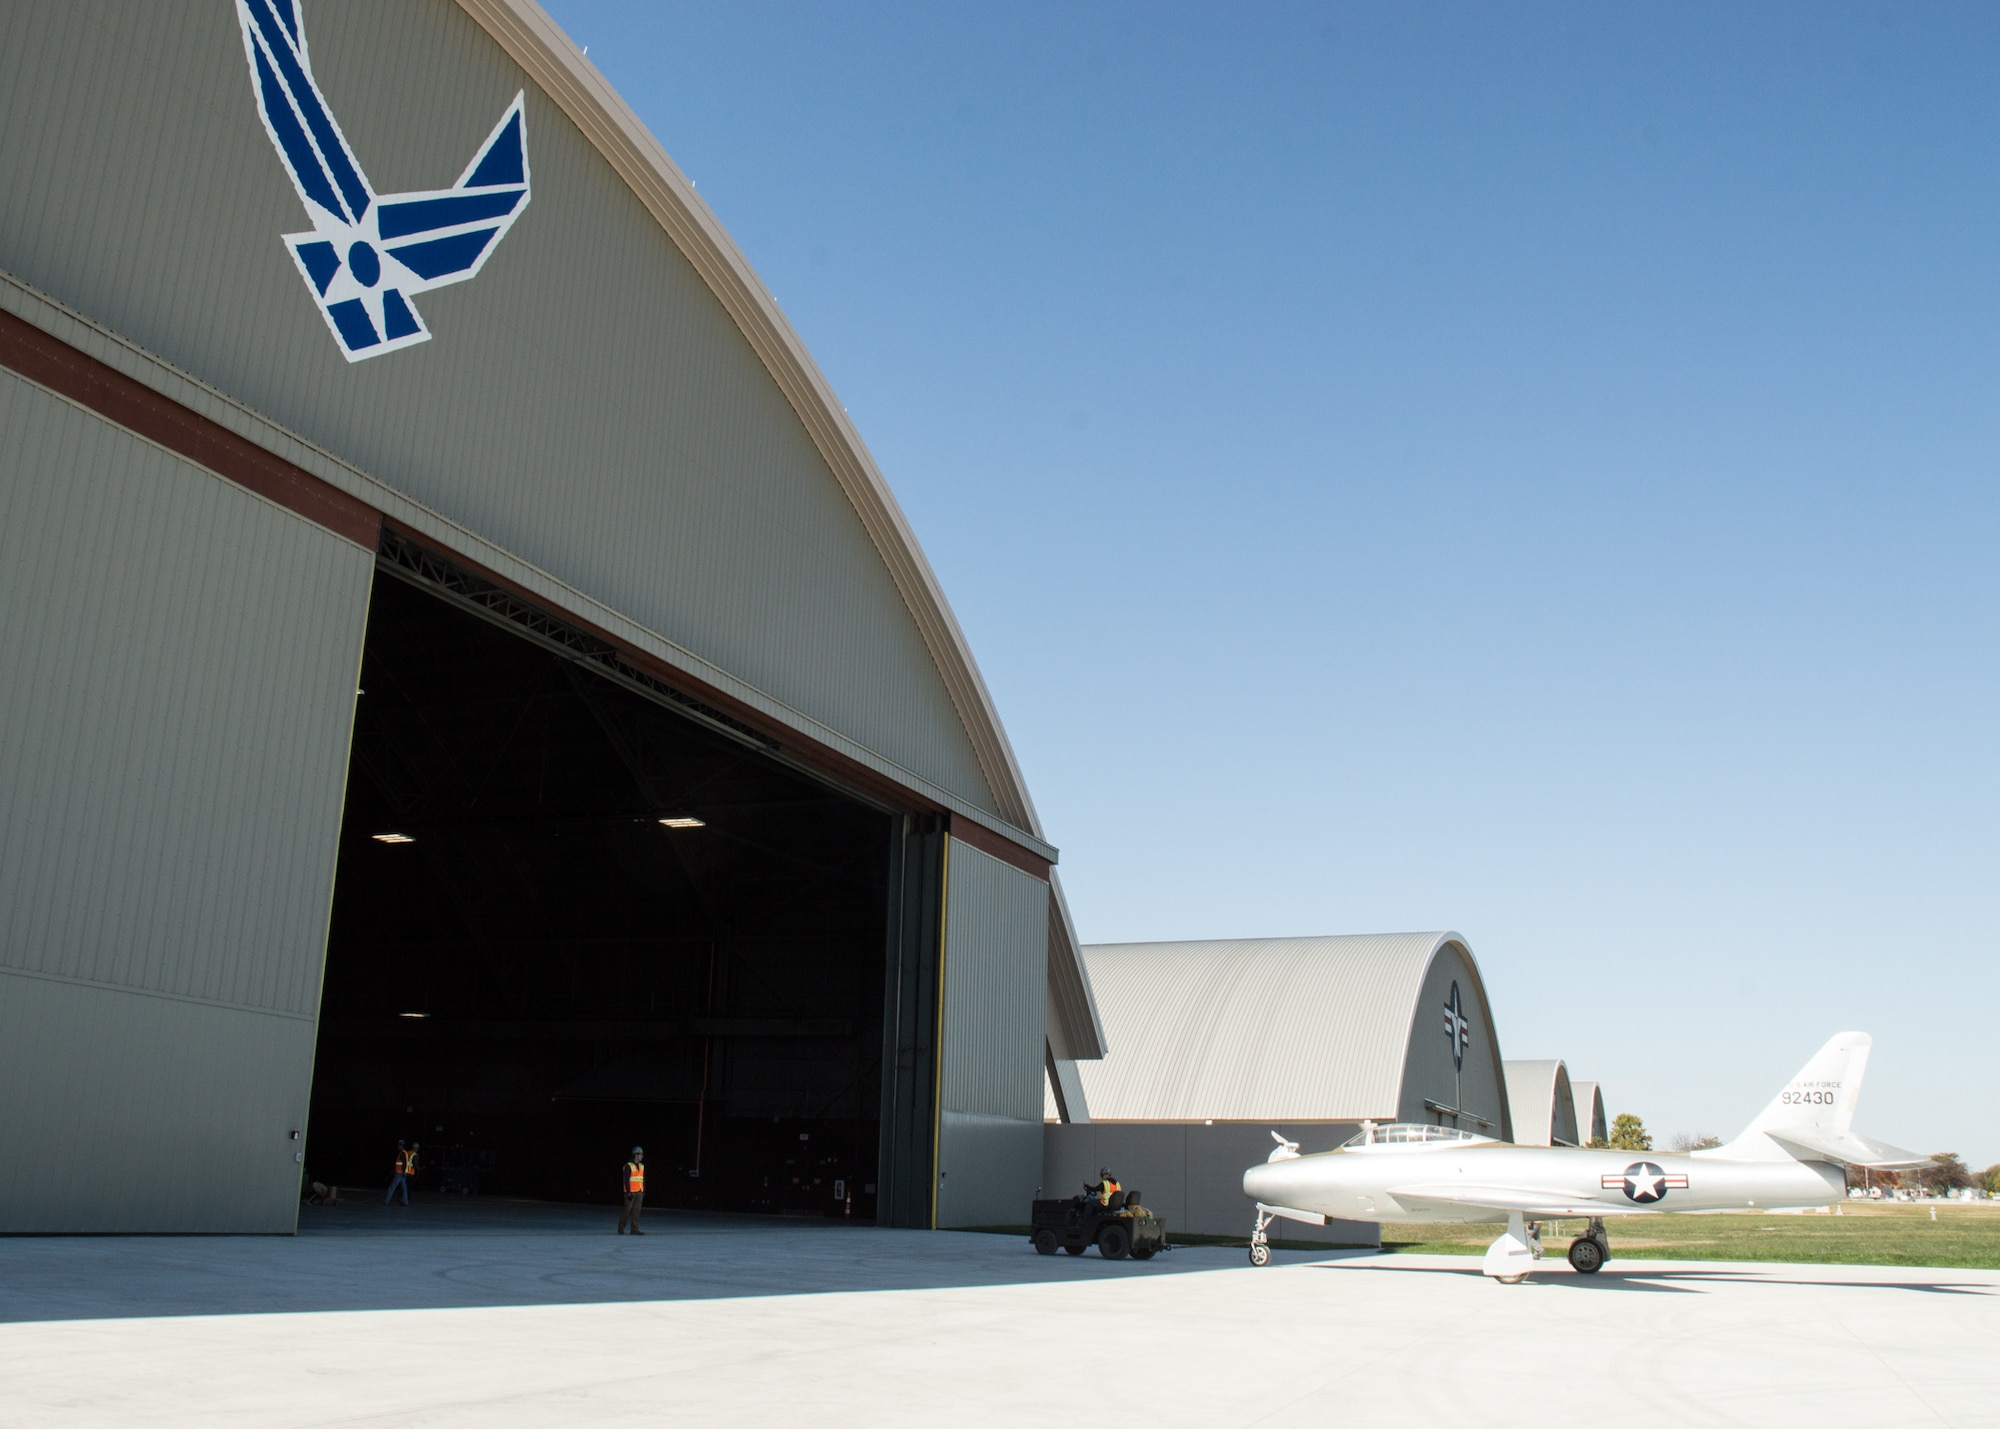 Restoration staff move the Republic YRF-84F Ficon into the new fourth building at the National Museum of the U.S. Air Force on Oct. 8, 2015. (U.S. Air Force photo by Ken LaRock)